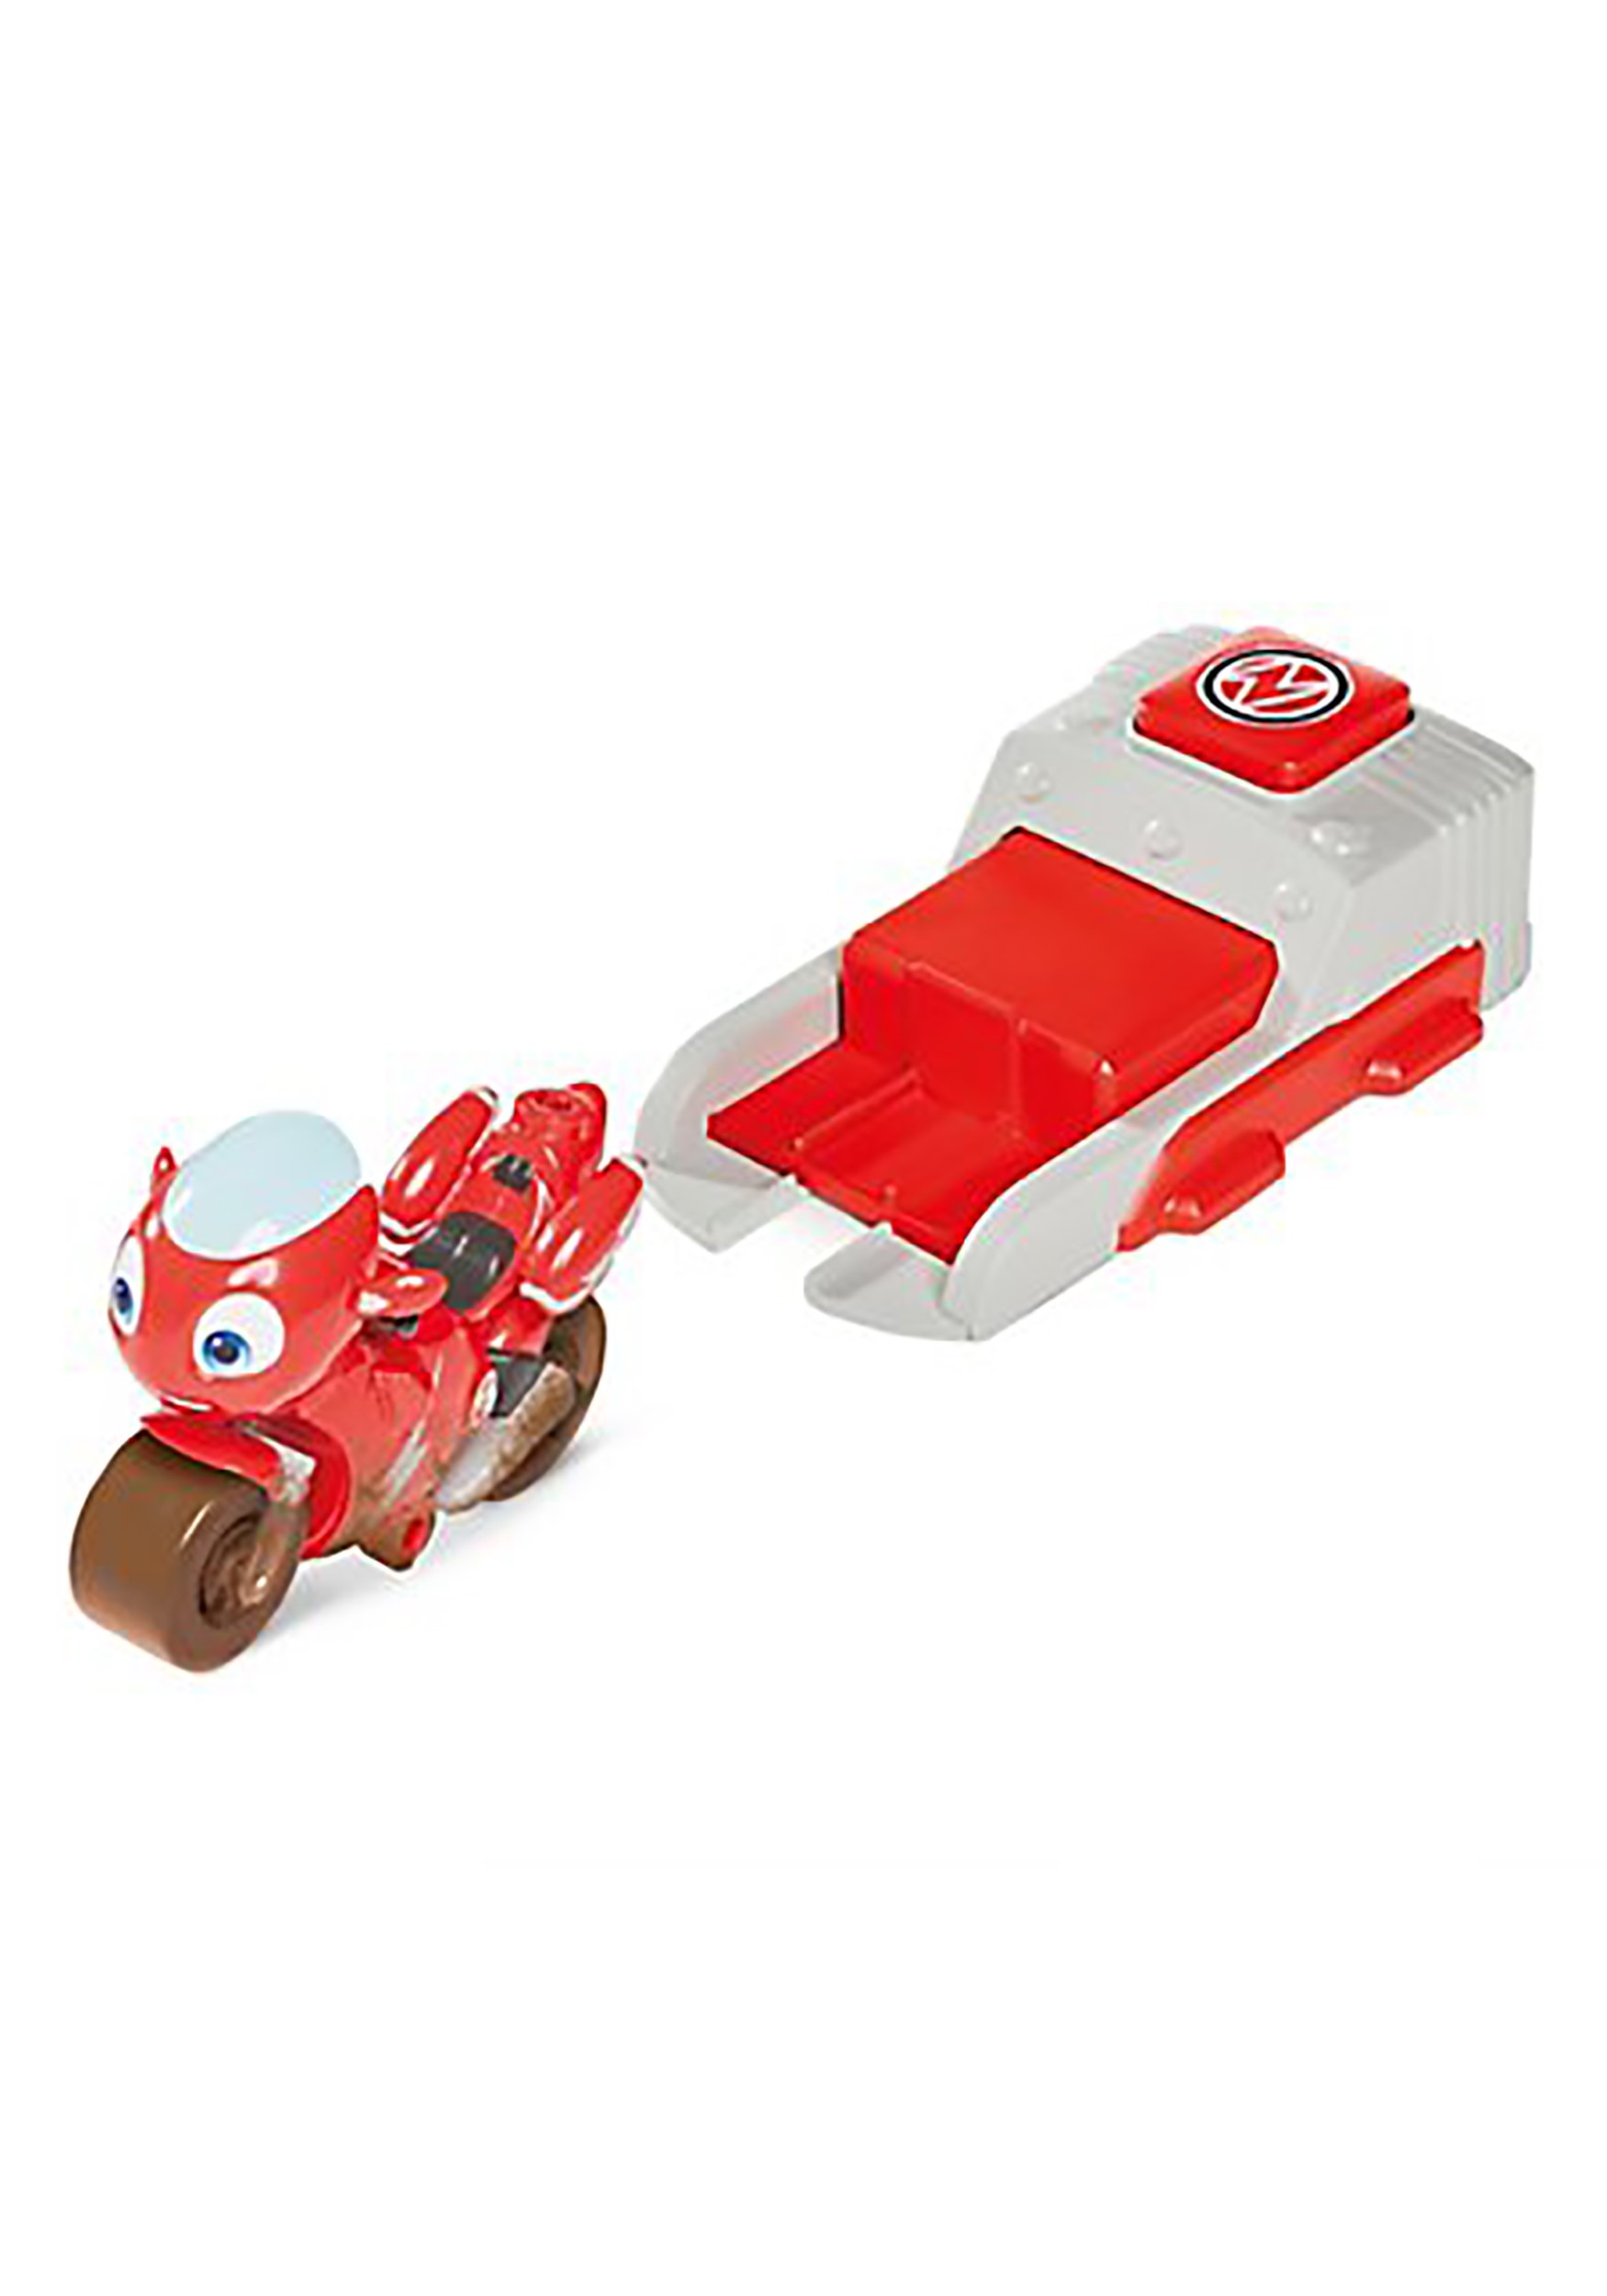 Ricky Zoom Launch & Go Playset with Ricky Zoom Toy Motorcycle